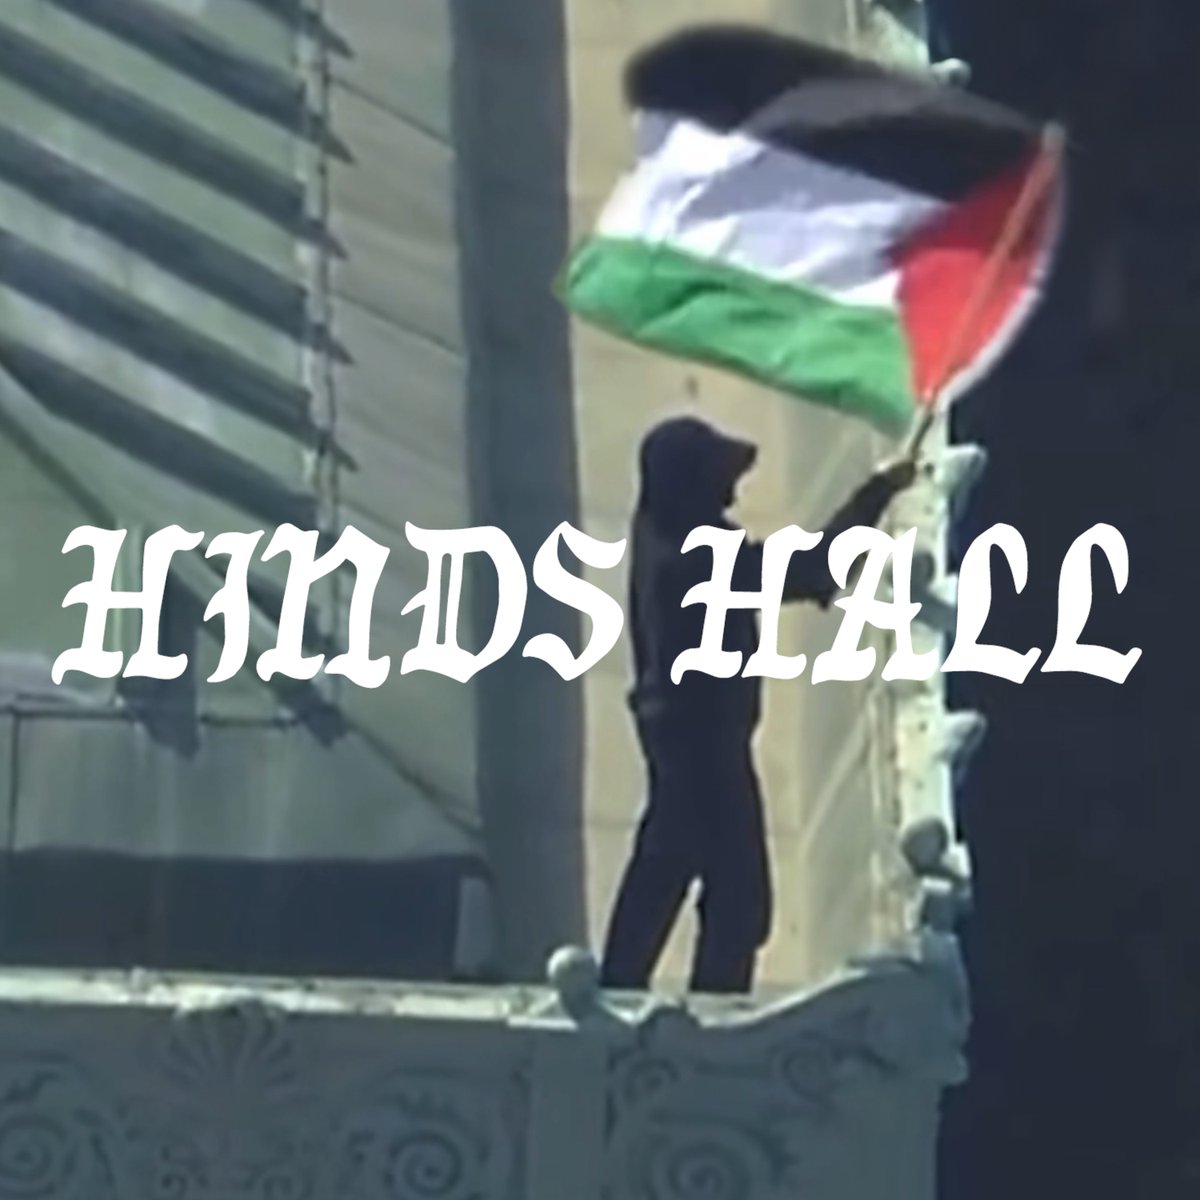 HIND’S HALL Now Available on Streaming. All Proceeds to UNRWA. macklemore.co/HINDSHALL